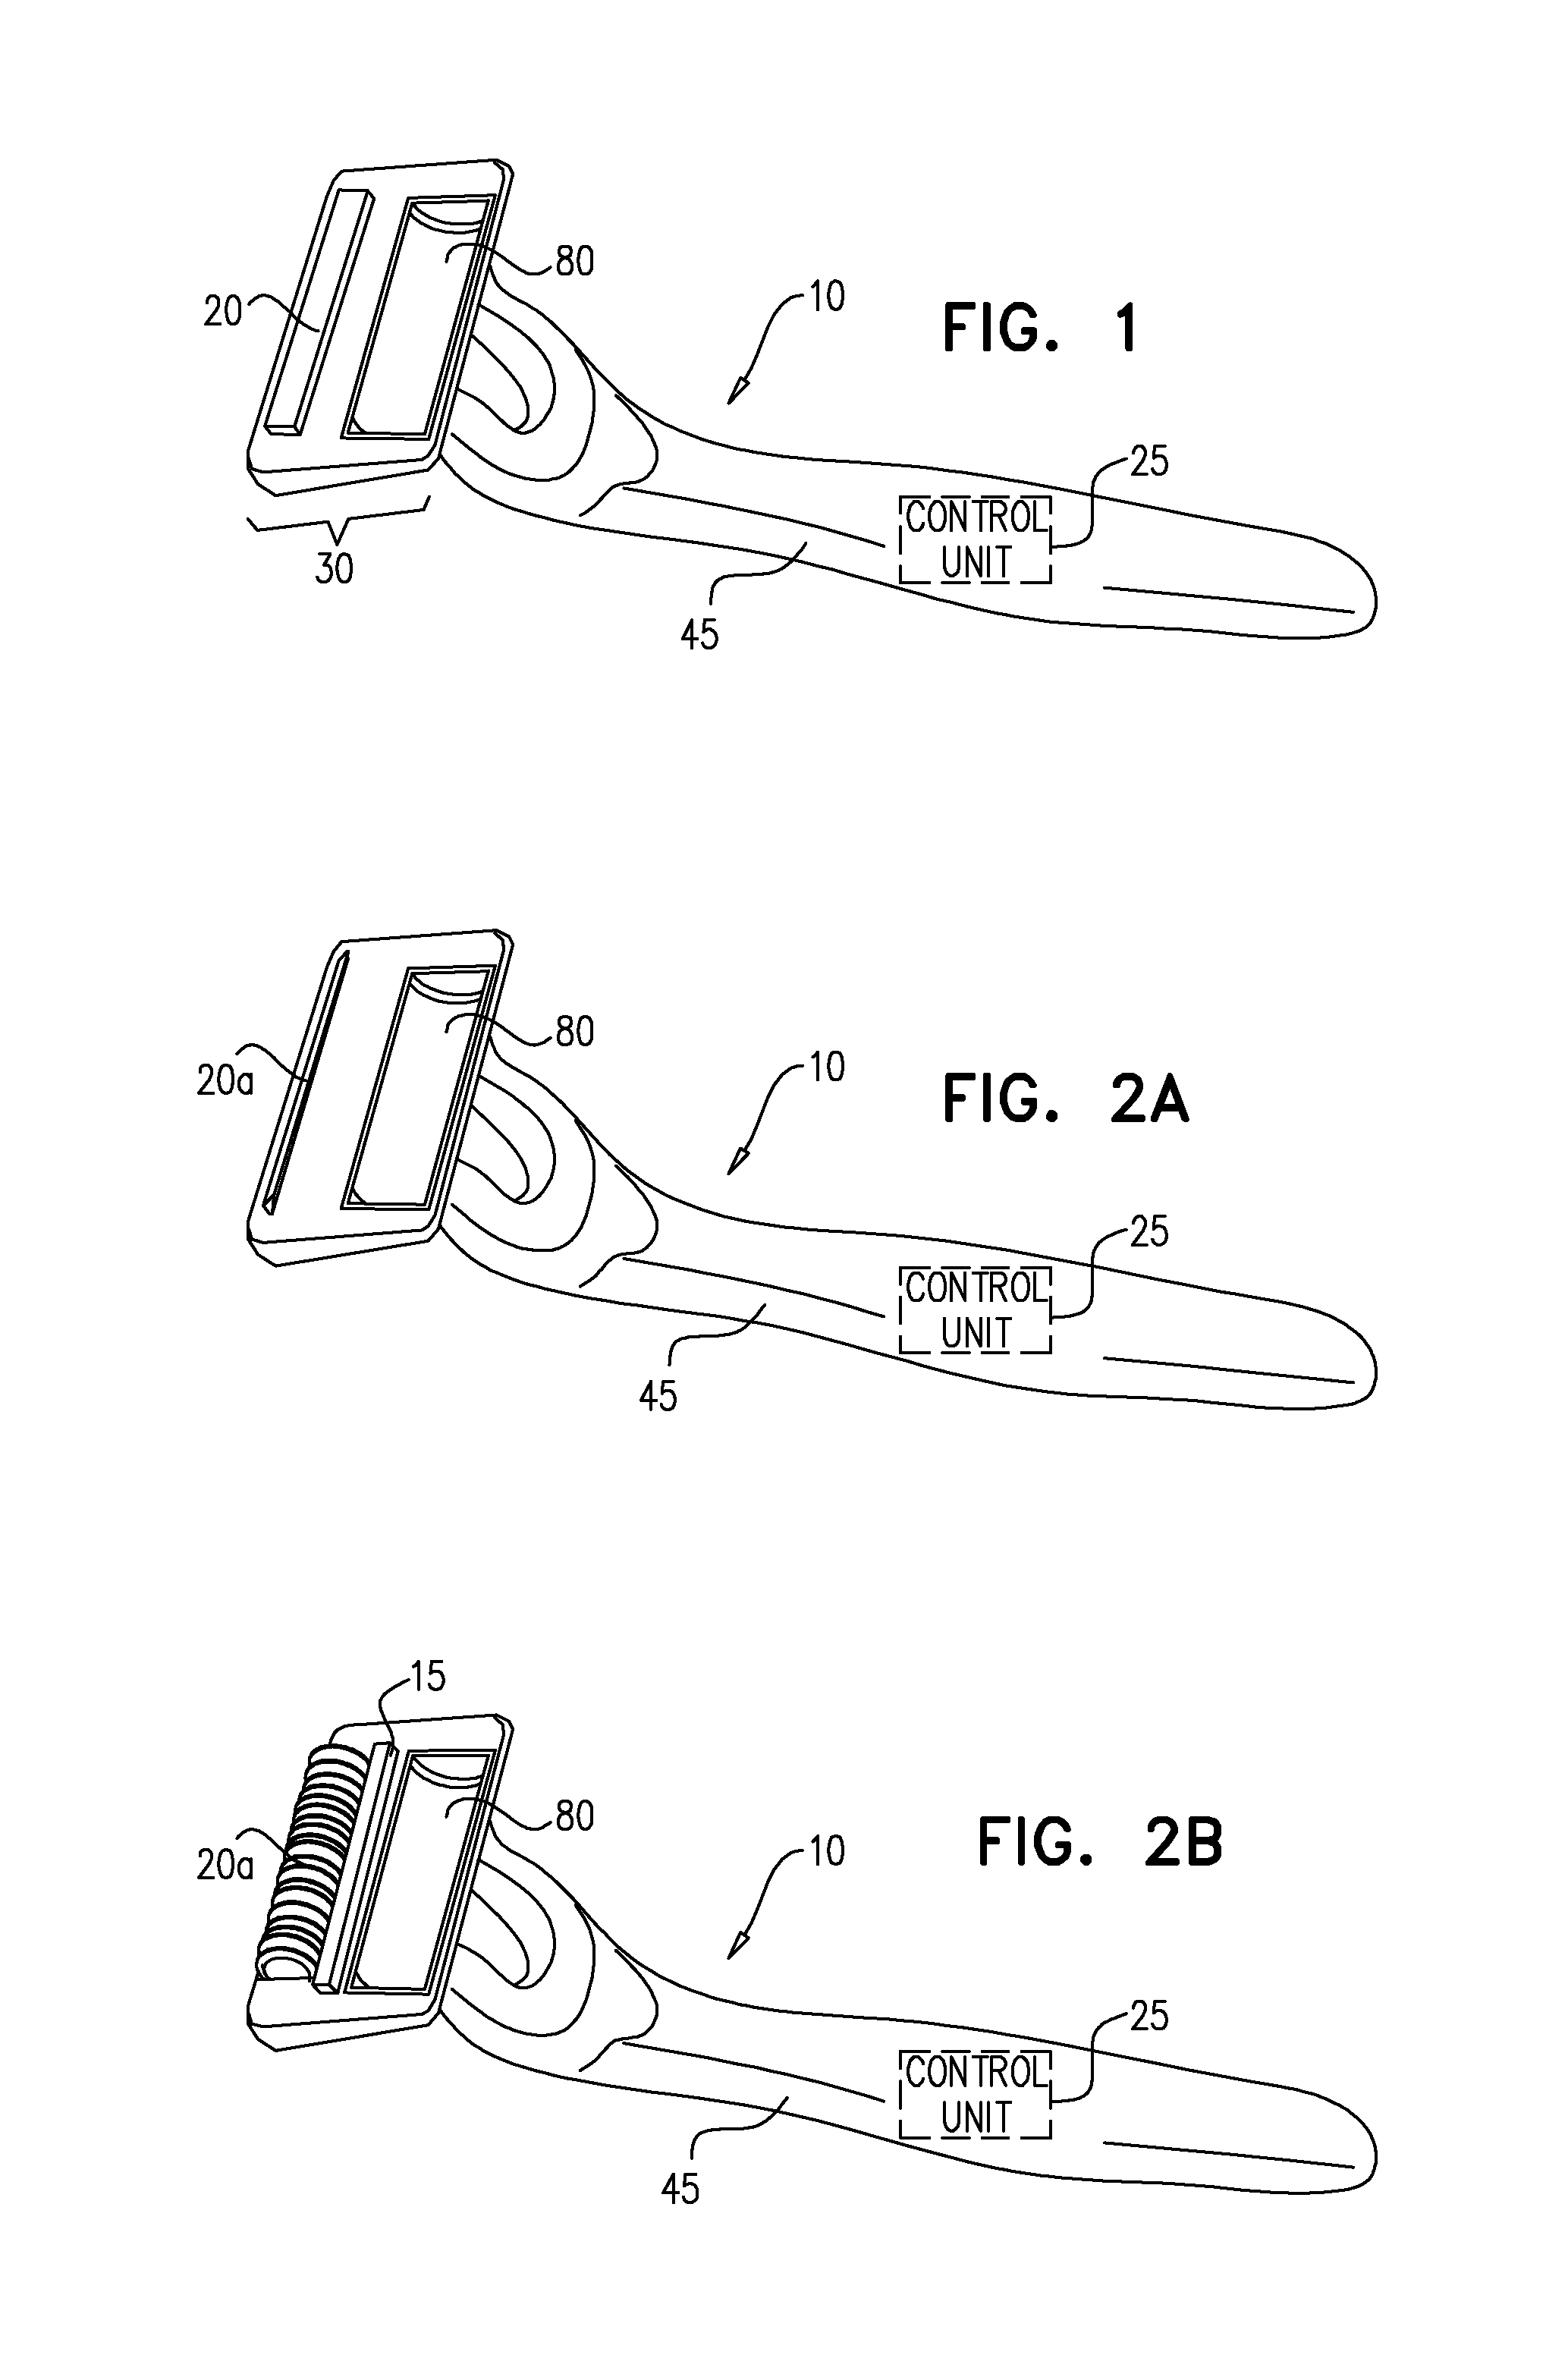 Ultrasonic skin treatment device with hair removal capability